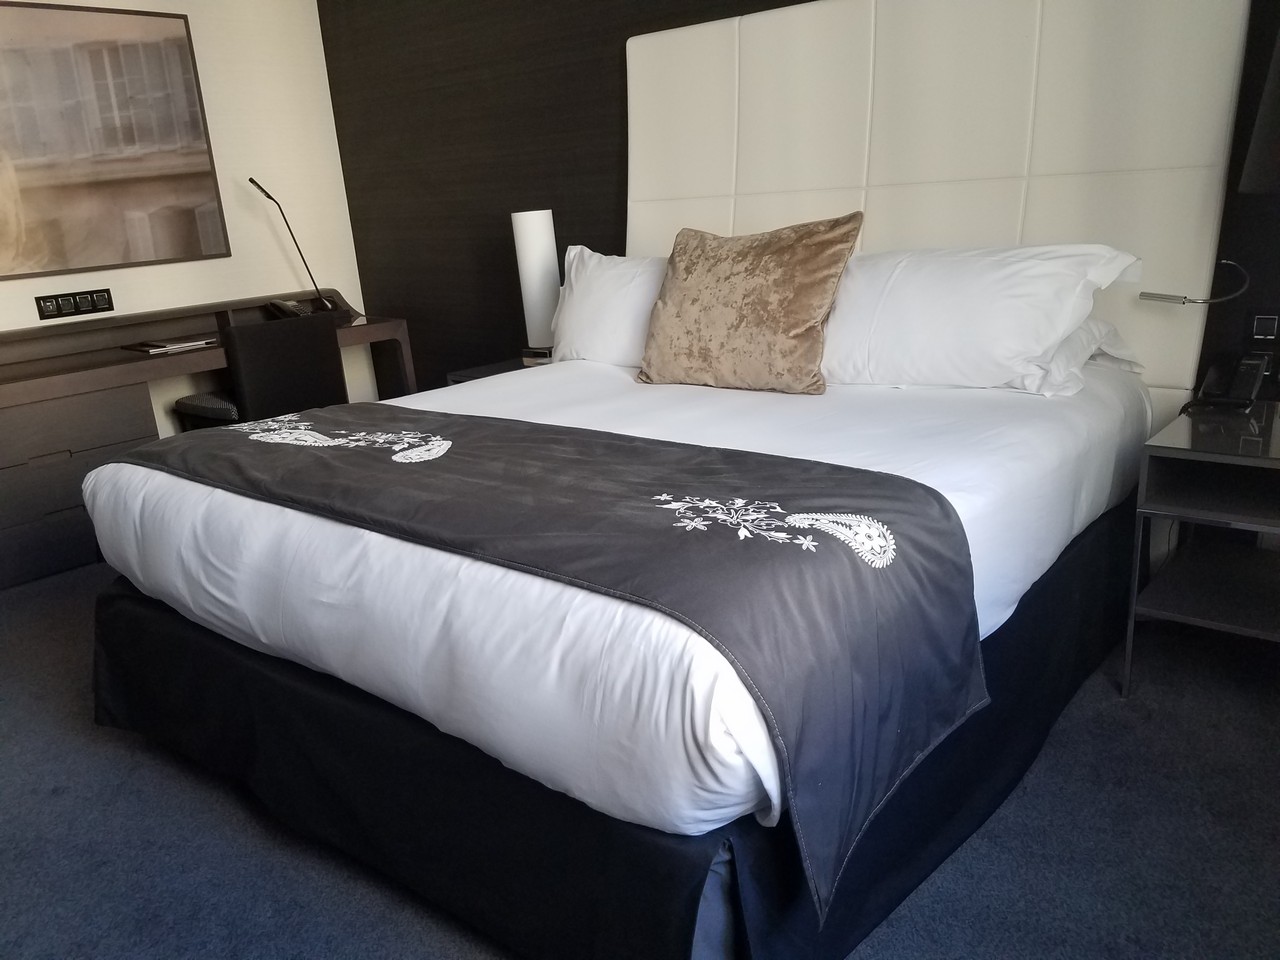 a bed with a black and white blanket